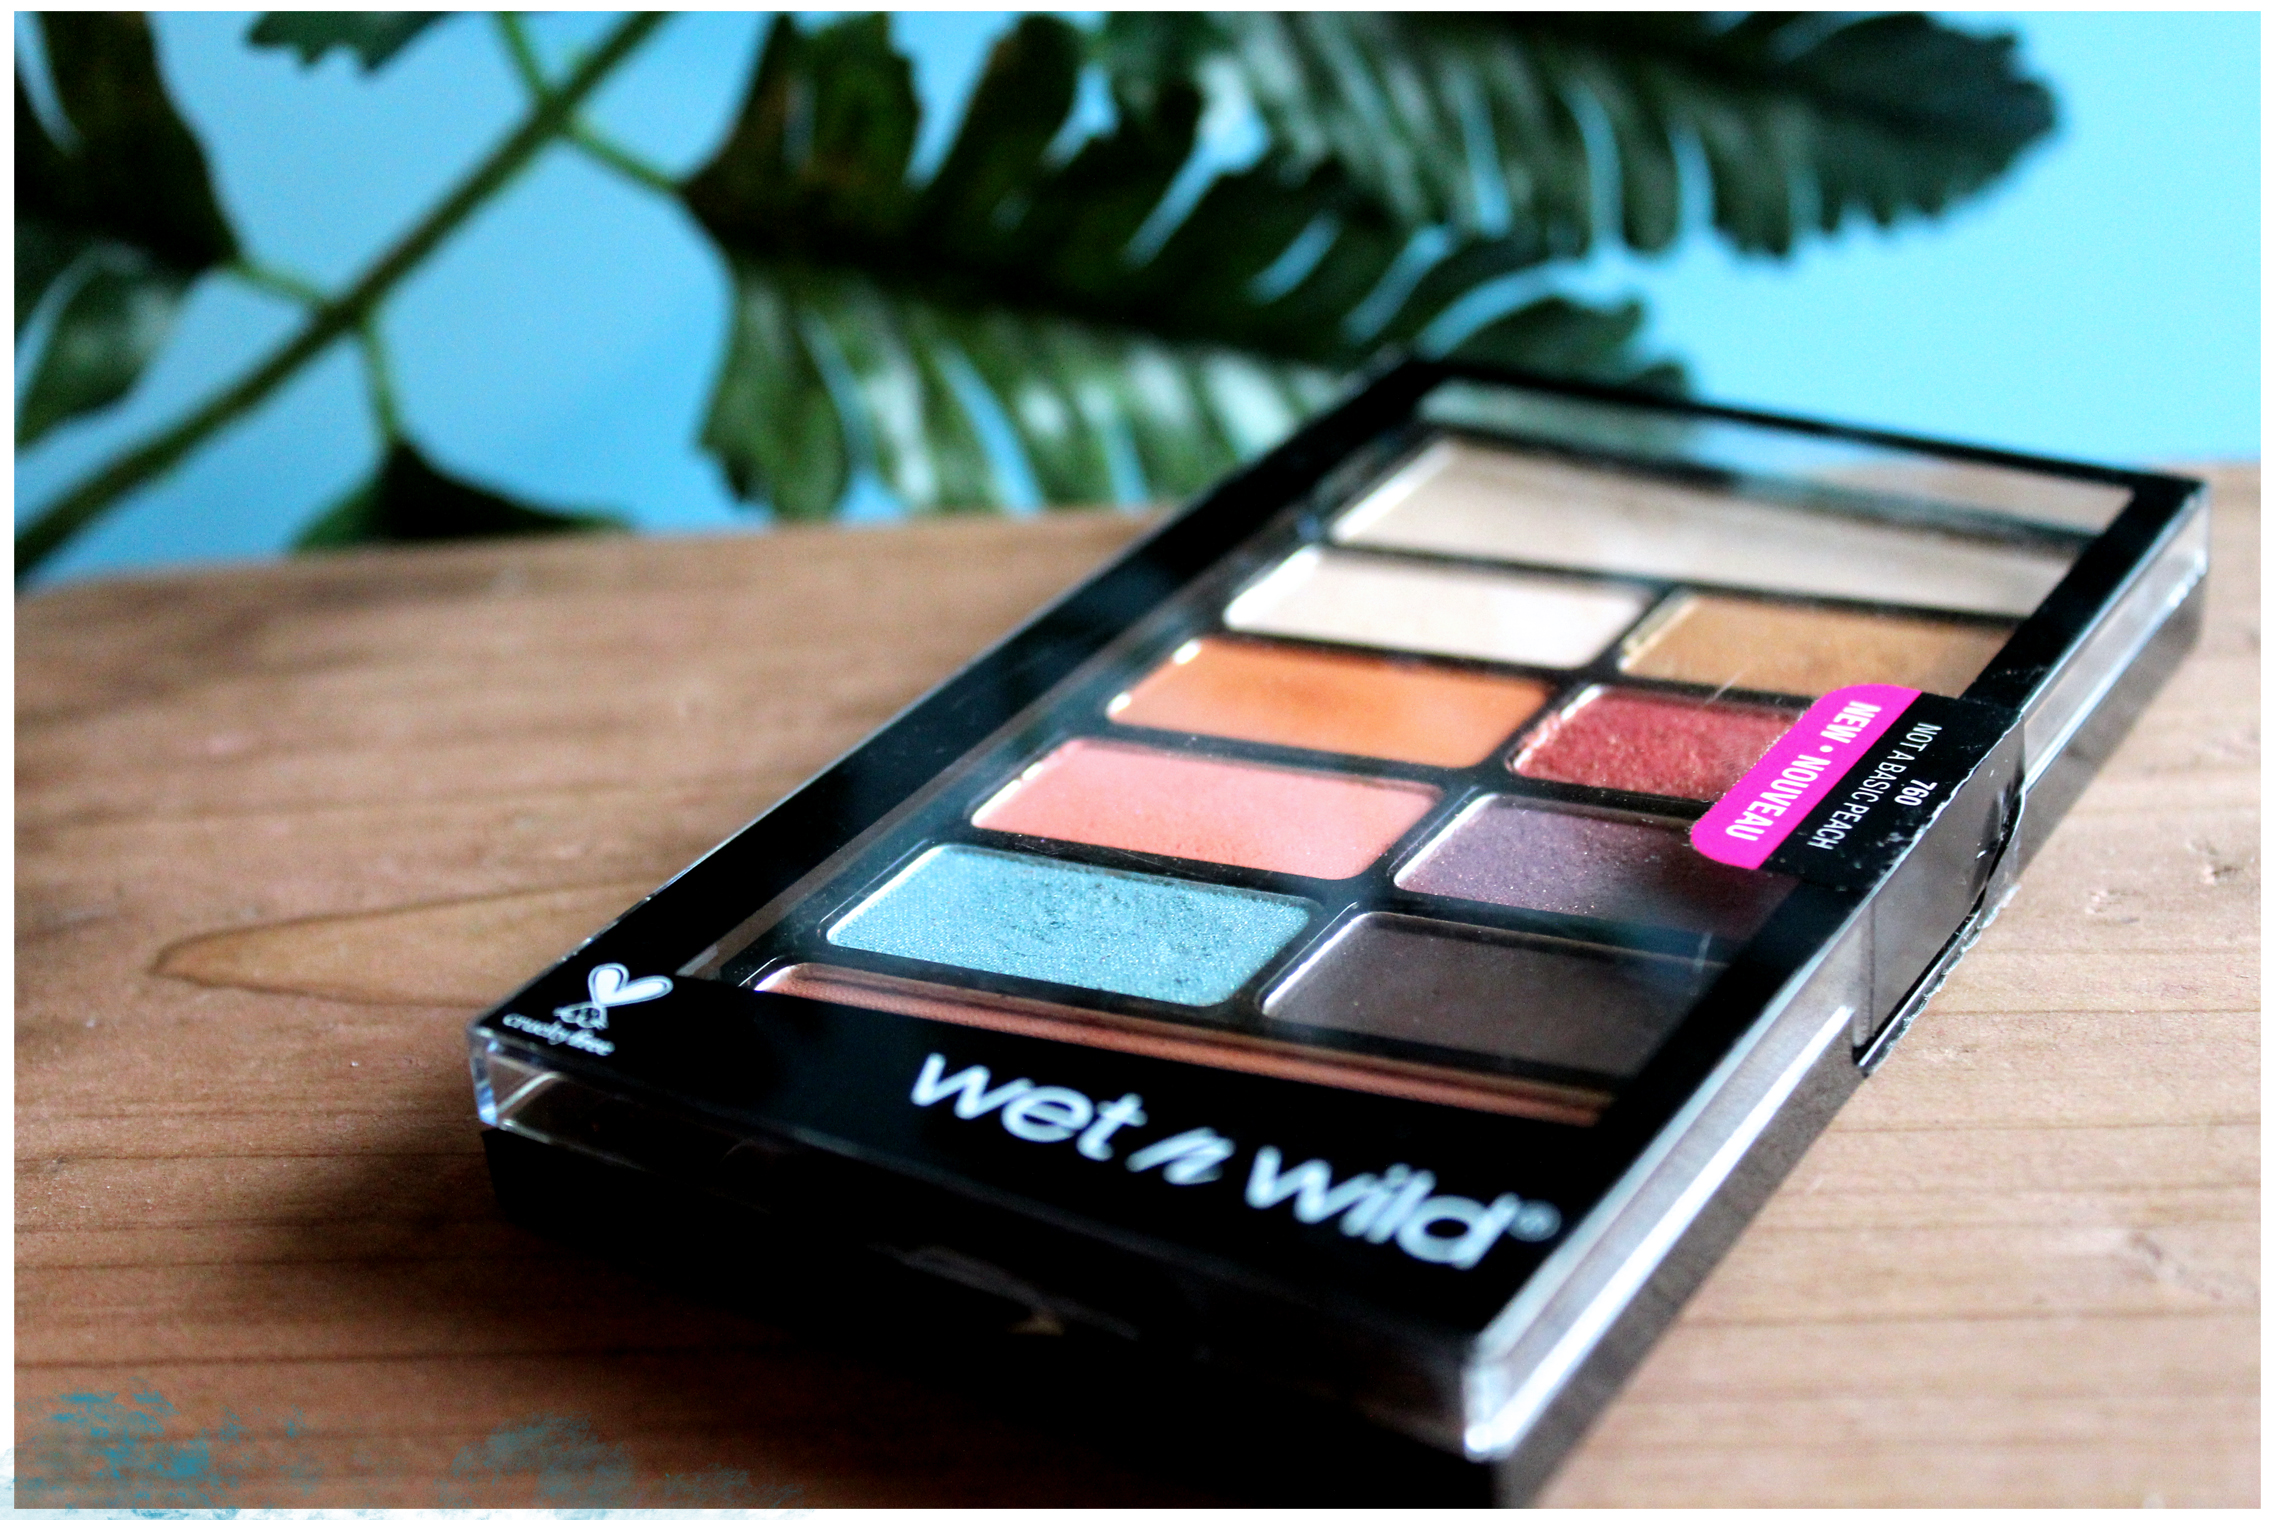 Wet n Wild Not a Basic Peach Eyeshadow Palette Review